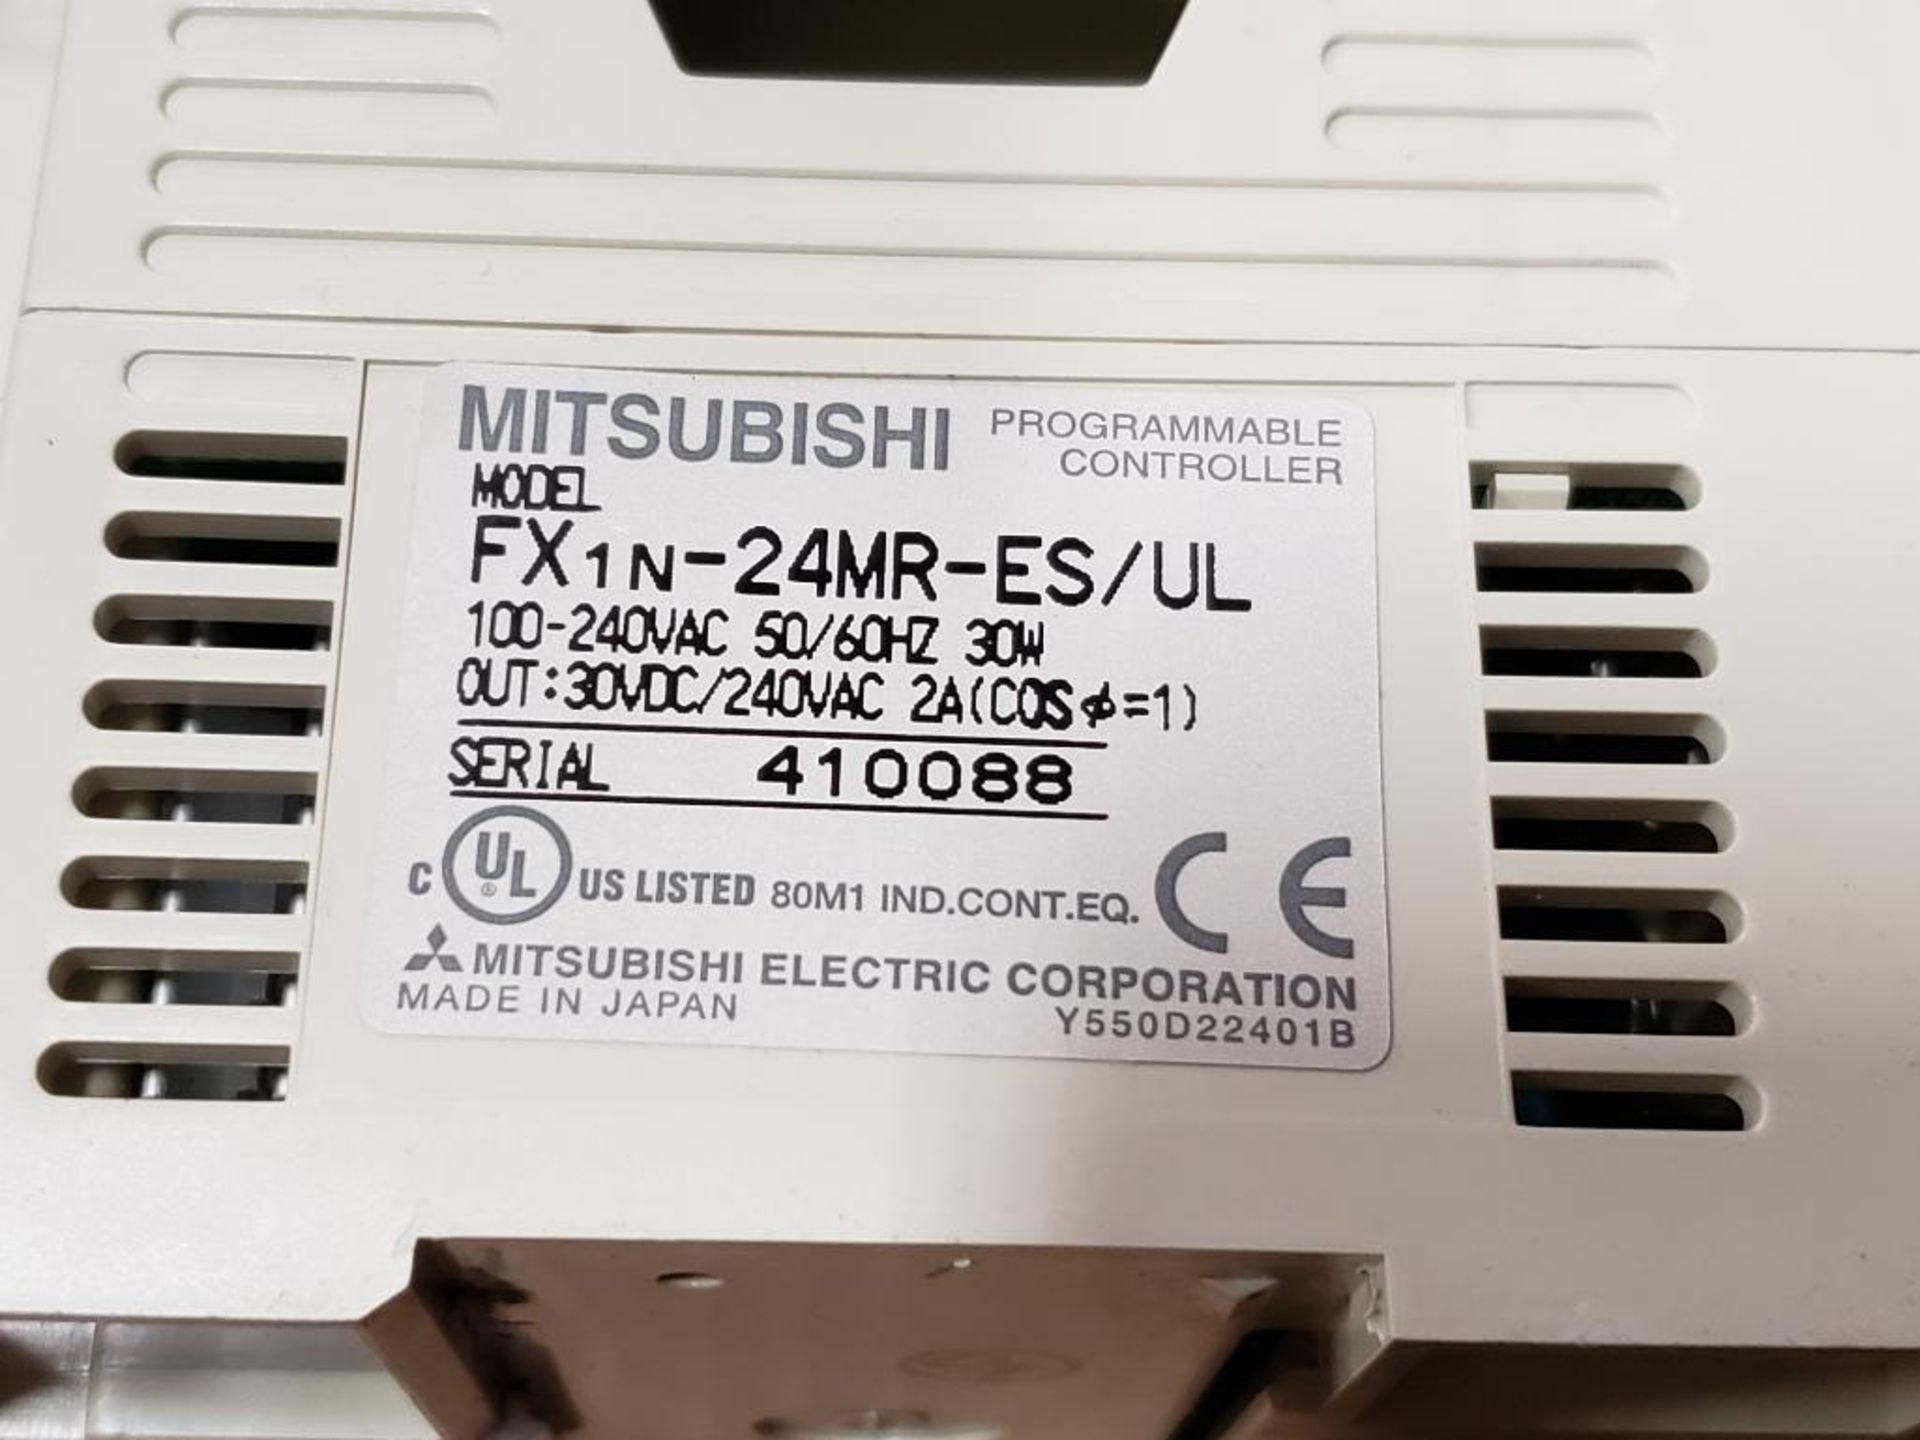 Qty 2 -Mitsubishi FX1N-24MR-ES/UL programmable controller. - Image 4 of 4